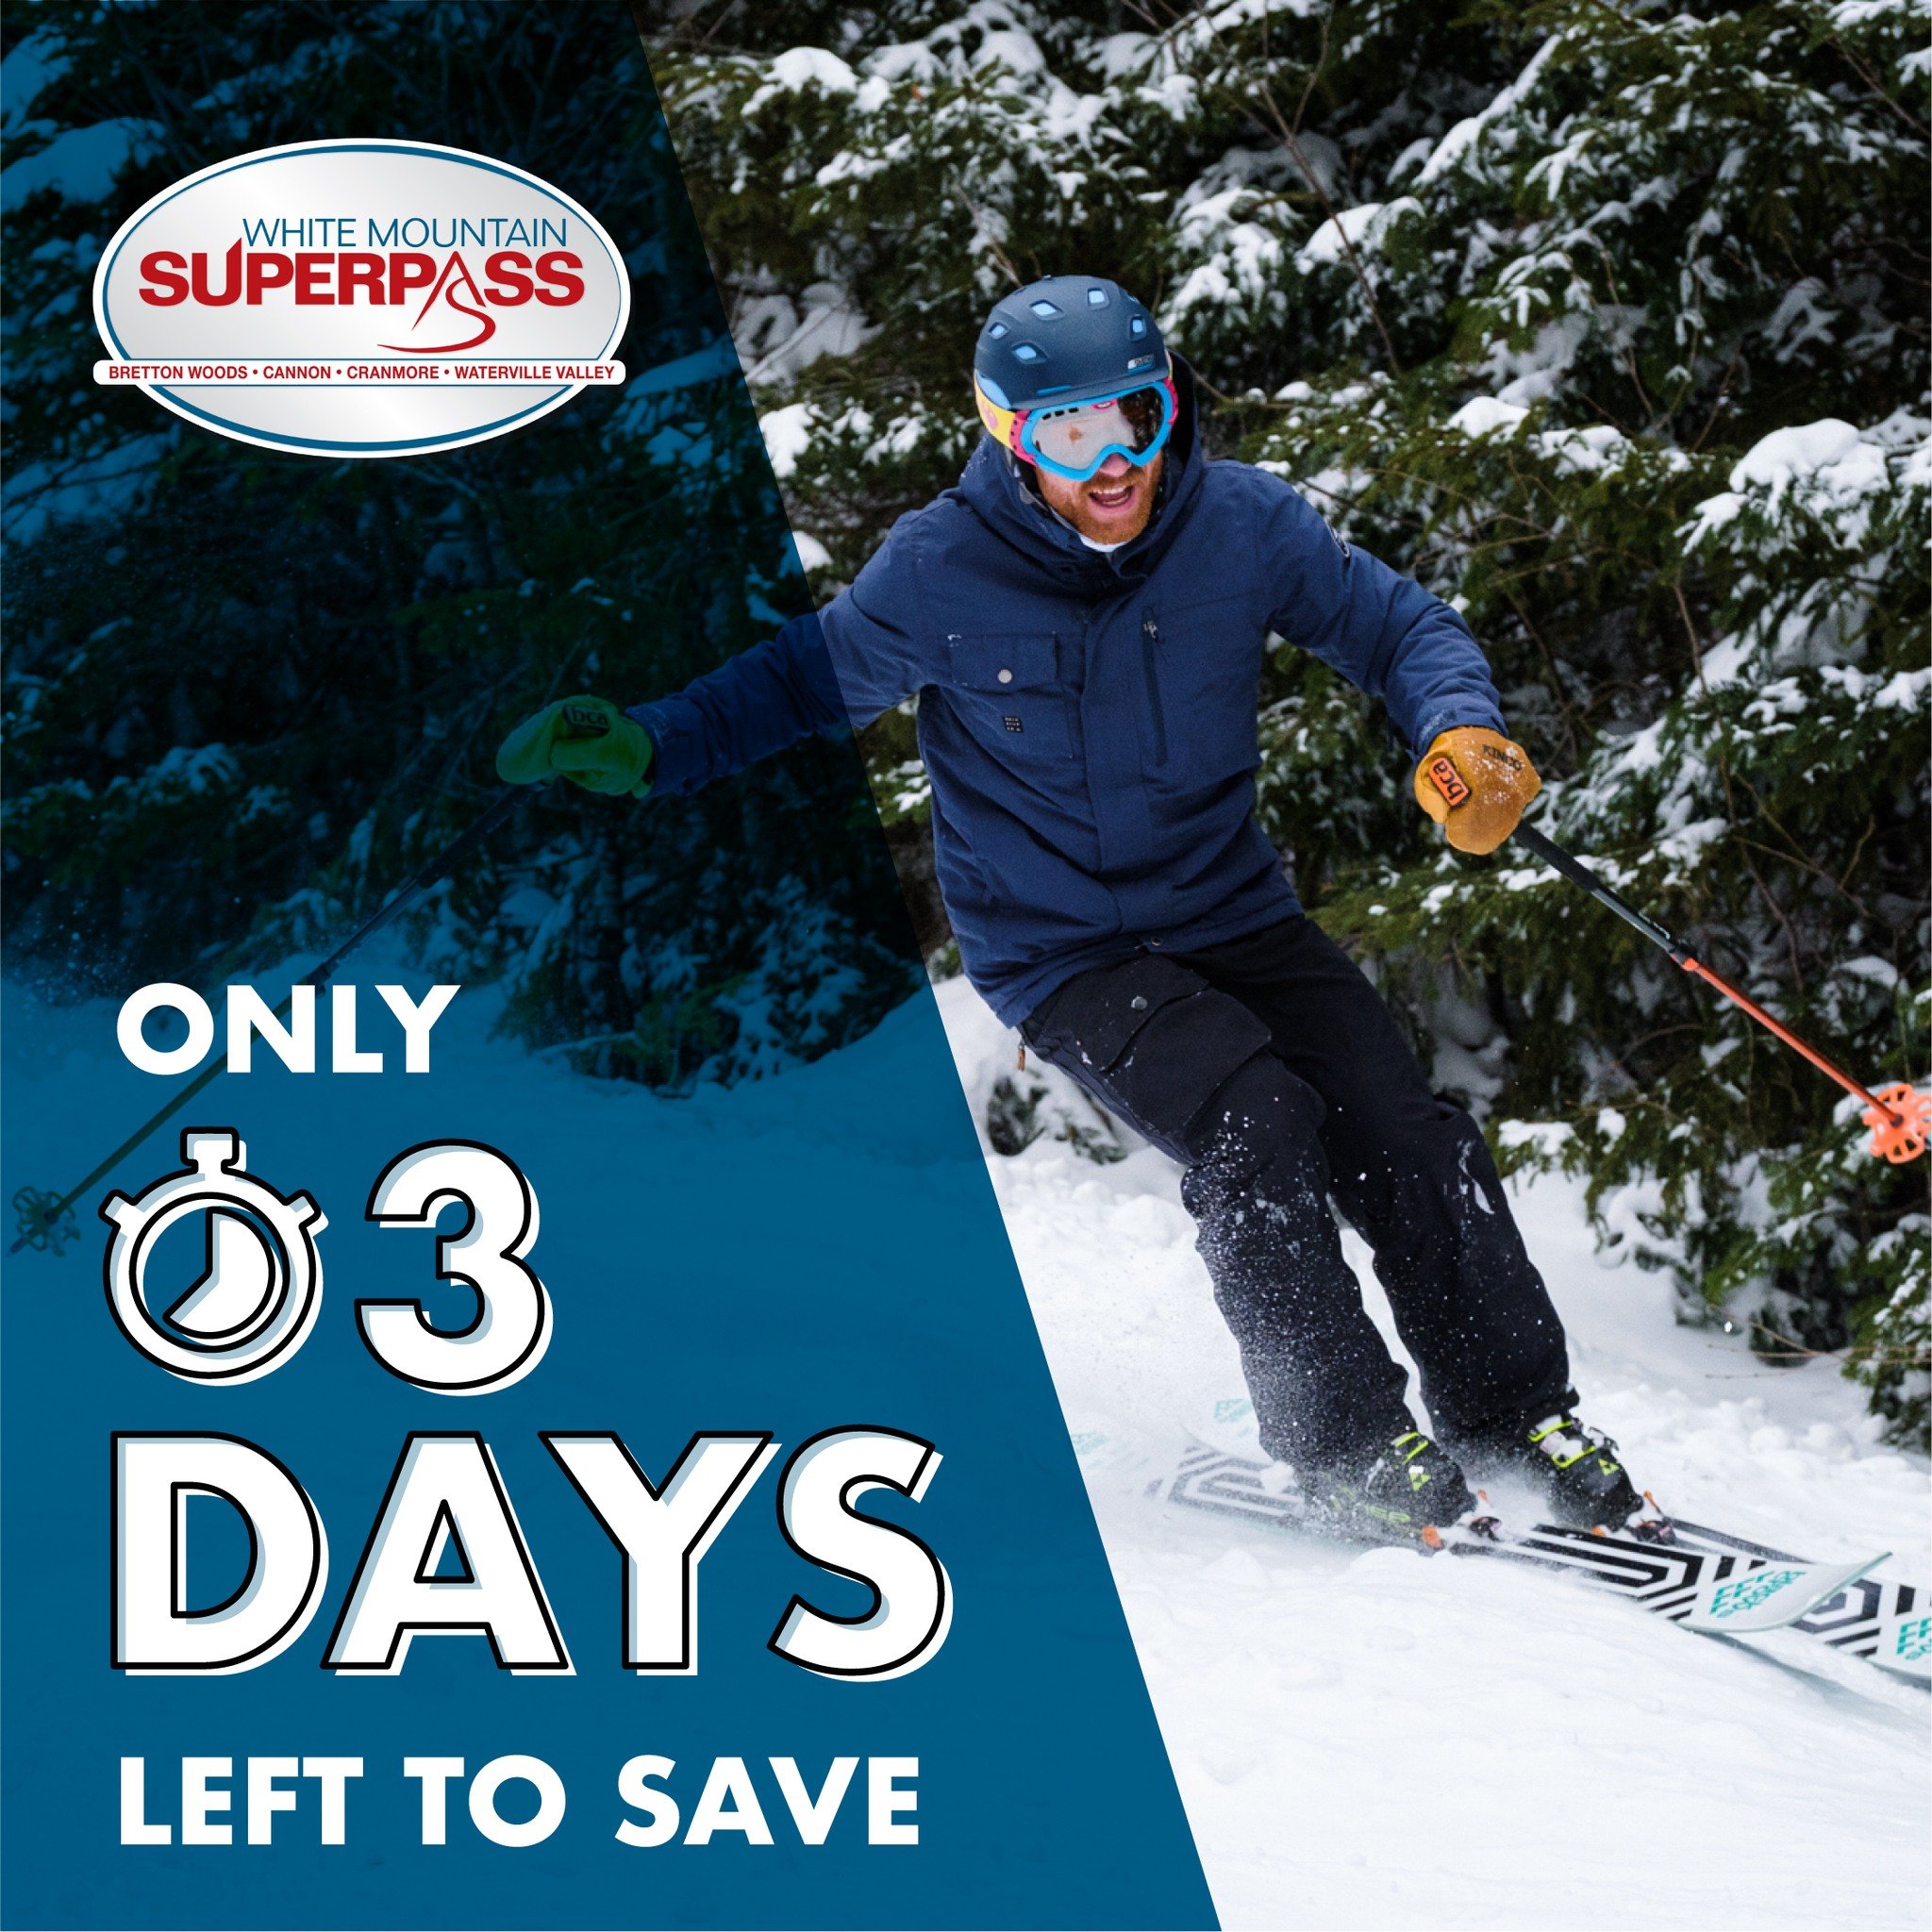 When the mountains are calling, the White Mountain Superpass is the answer! 3 days remain to buy this pass at its lowest price! Enjoy unlimited access to Waterville Valley, Cranmore, Bretton Woods and Cannon ⛷️

🔗 in bio to learn more and buy now!